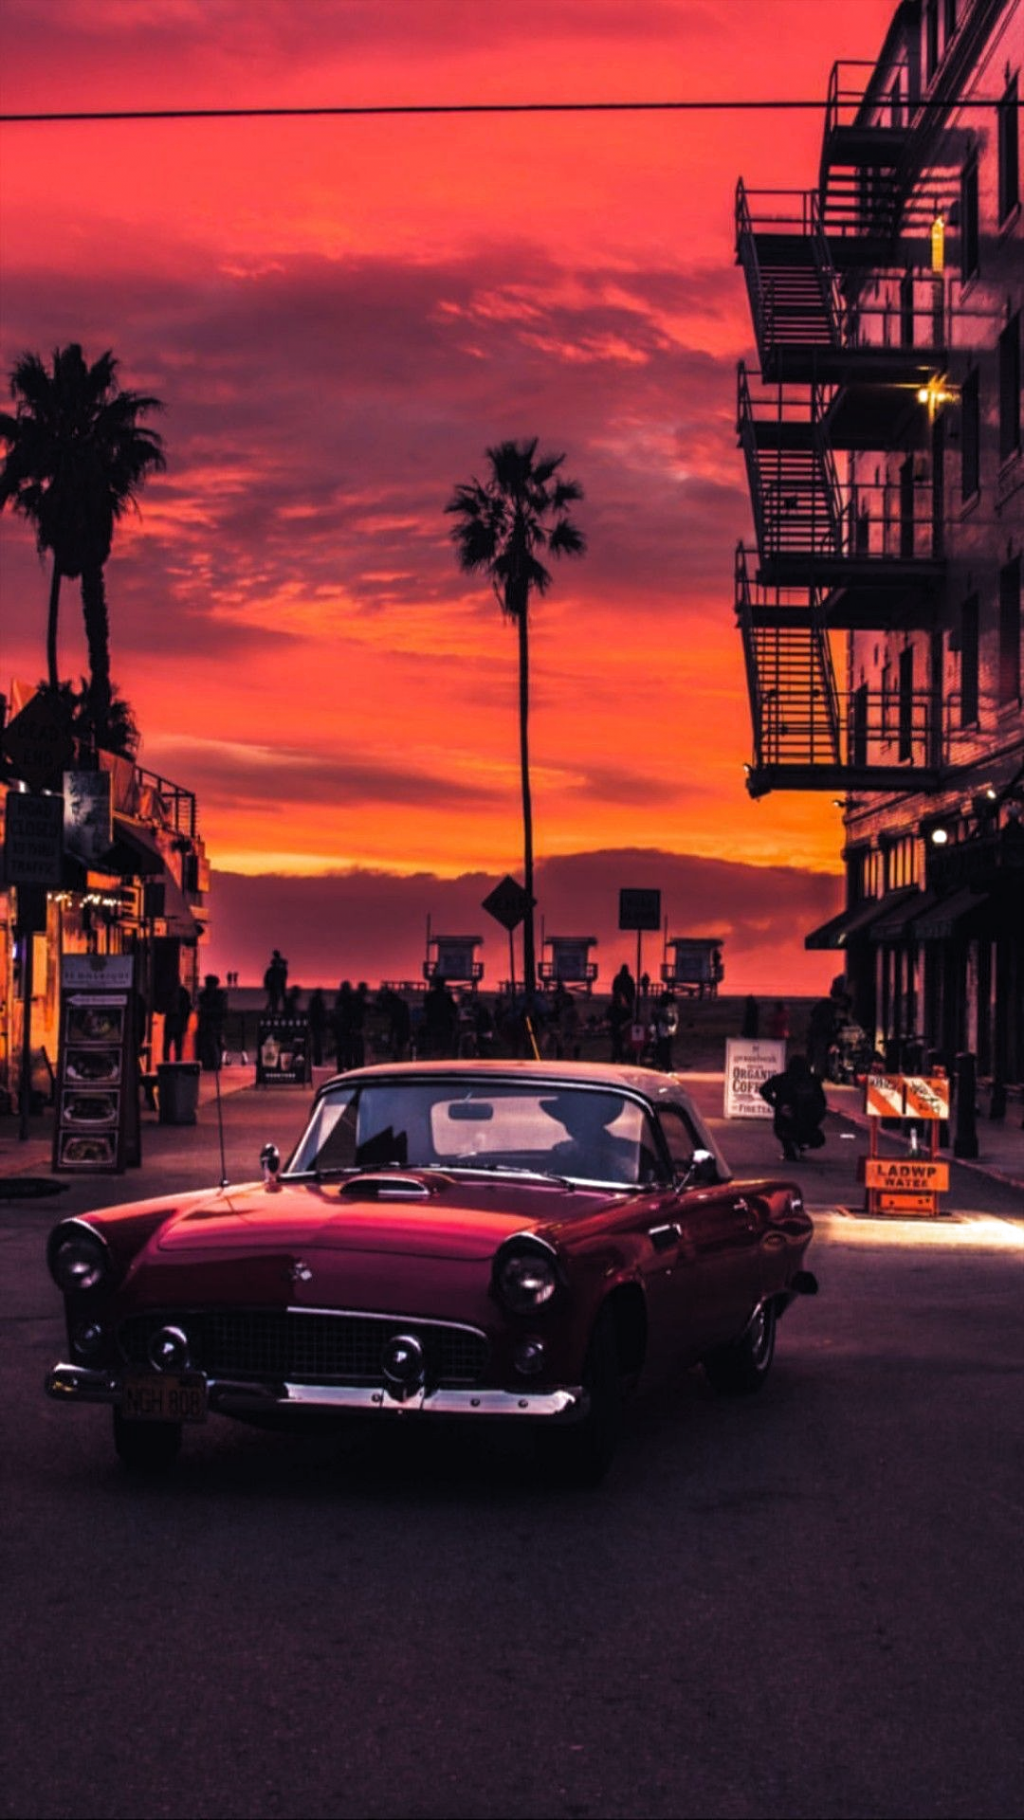 Retro car sunset aesthetic wallpapers